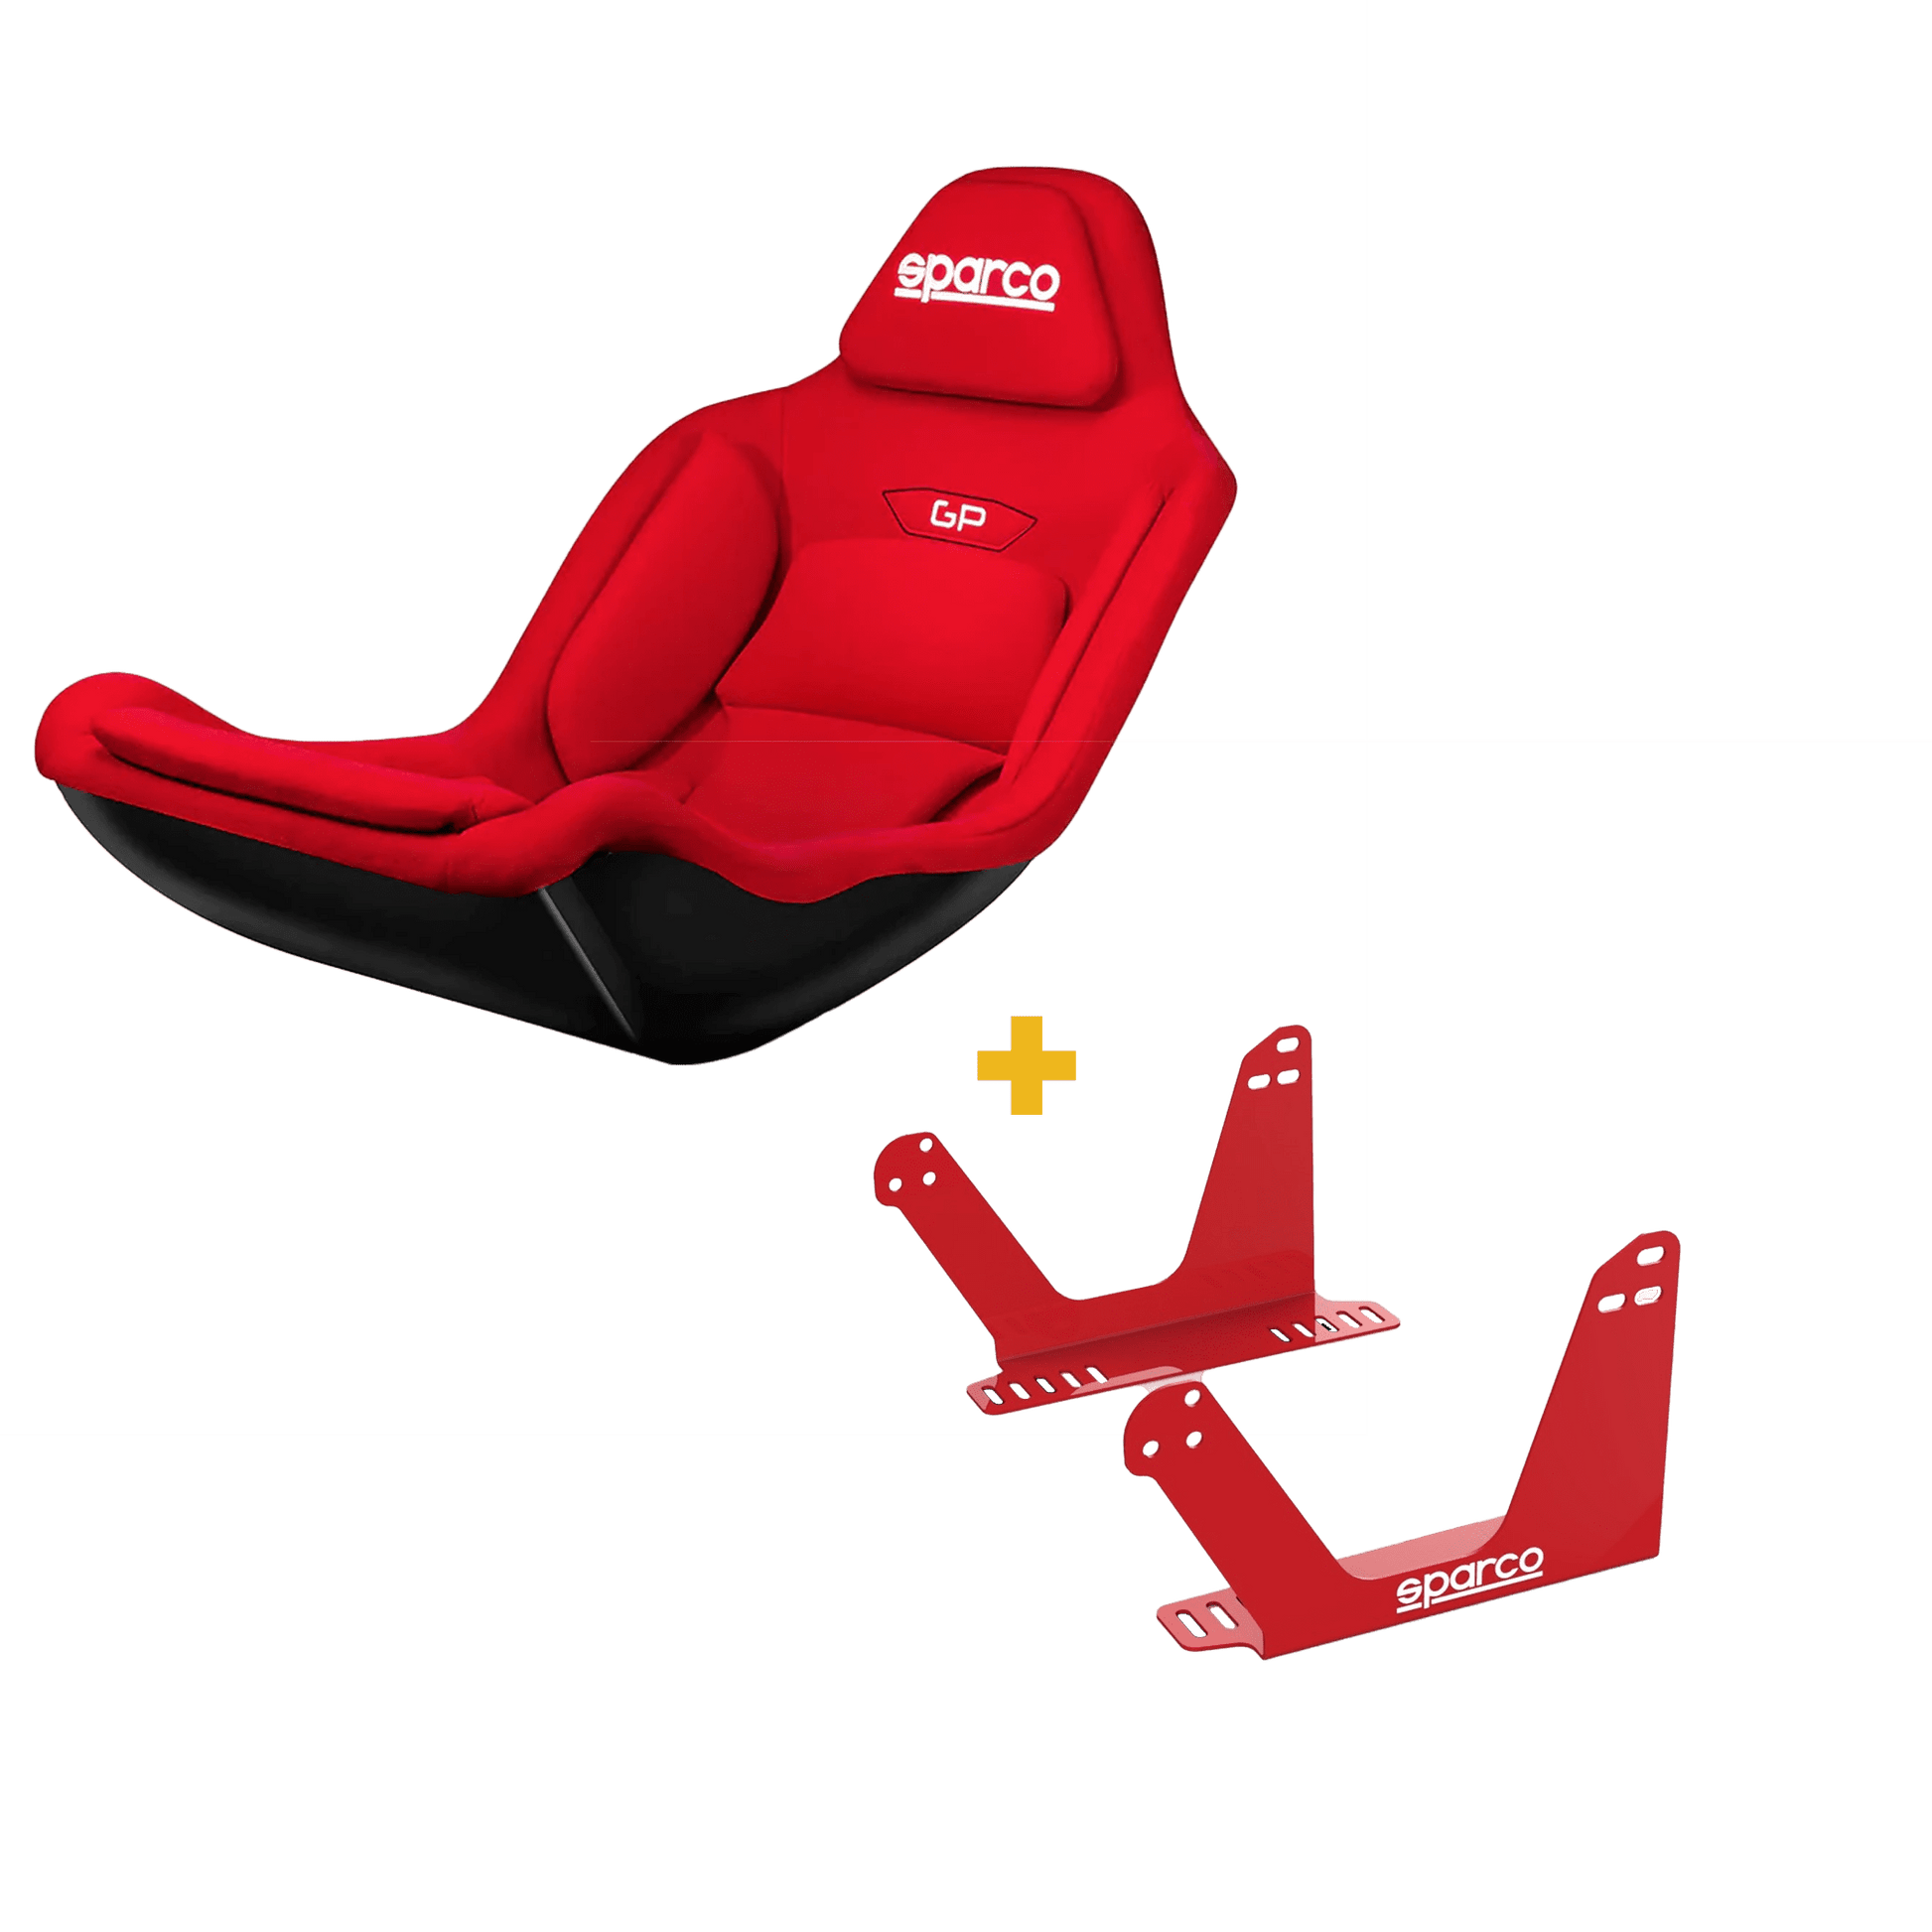 GP seat | SimCrafters